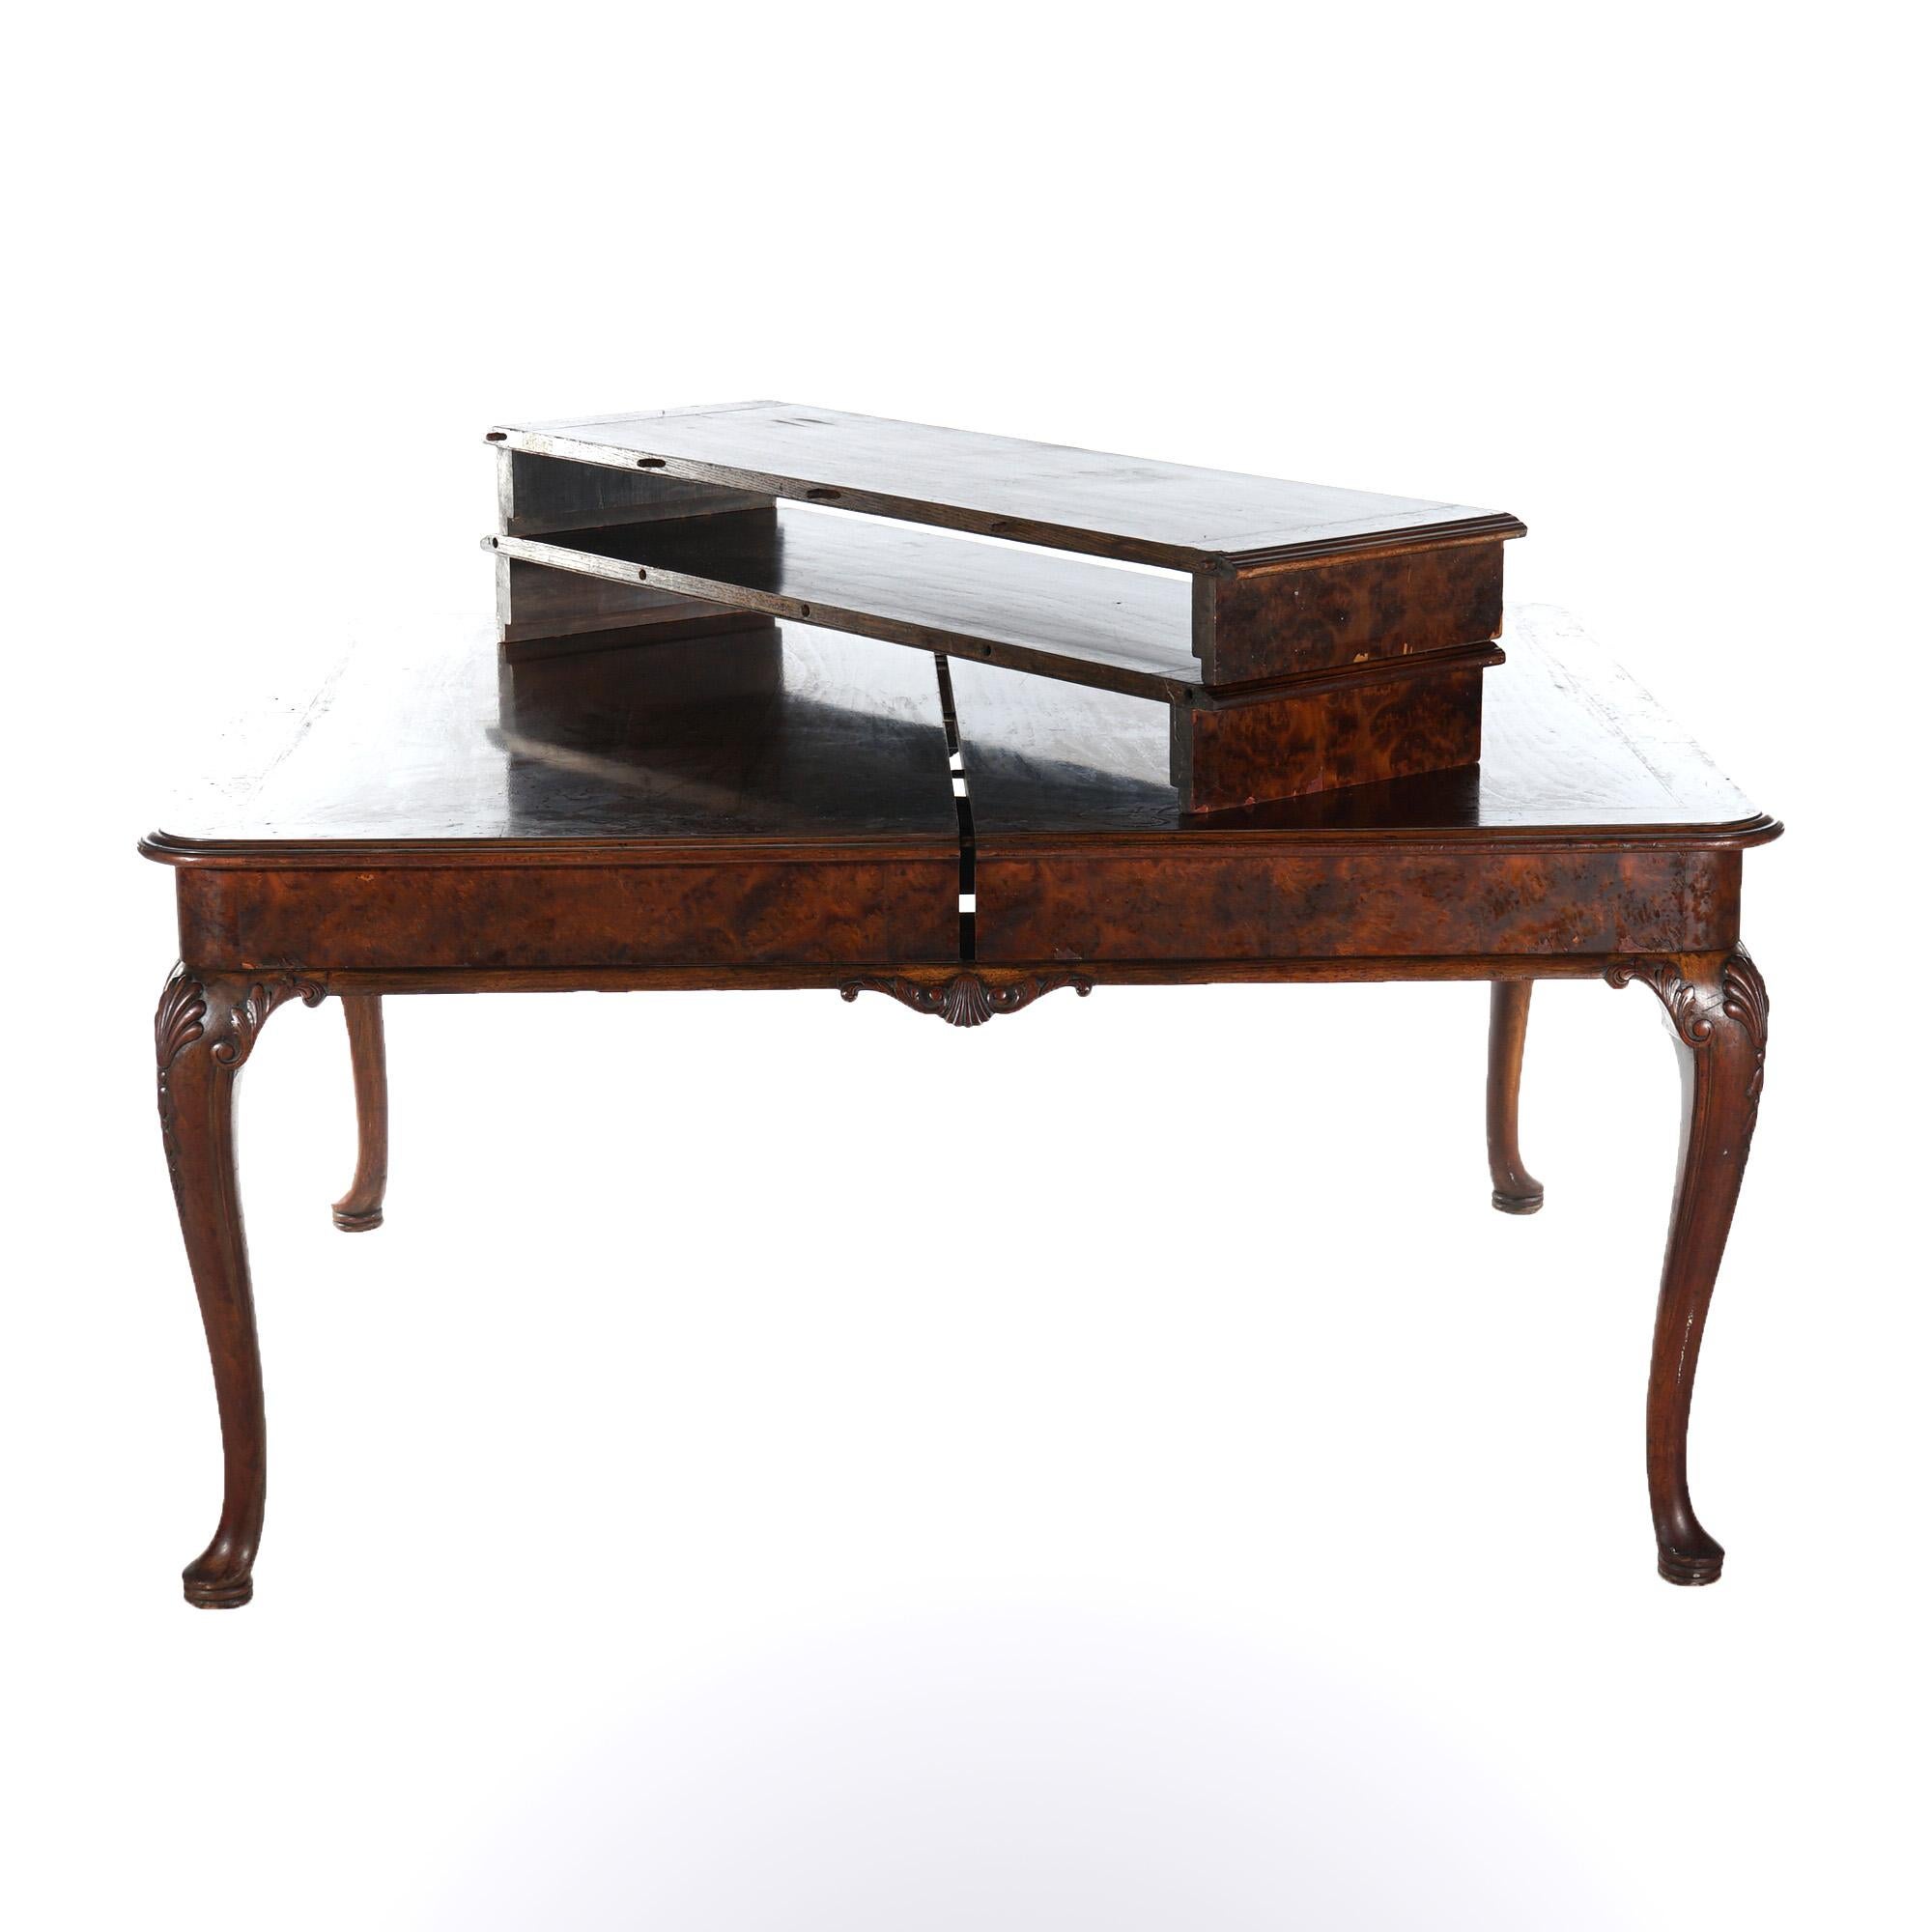 Antique Queen Anne Style Mahogany Banded Inlaid Dining Table & Two Leaves 1930 For Sale 13